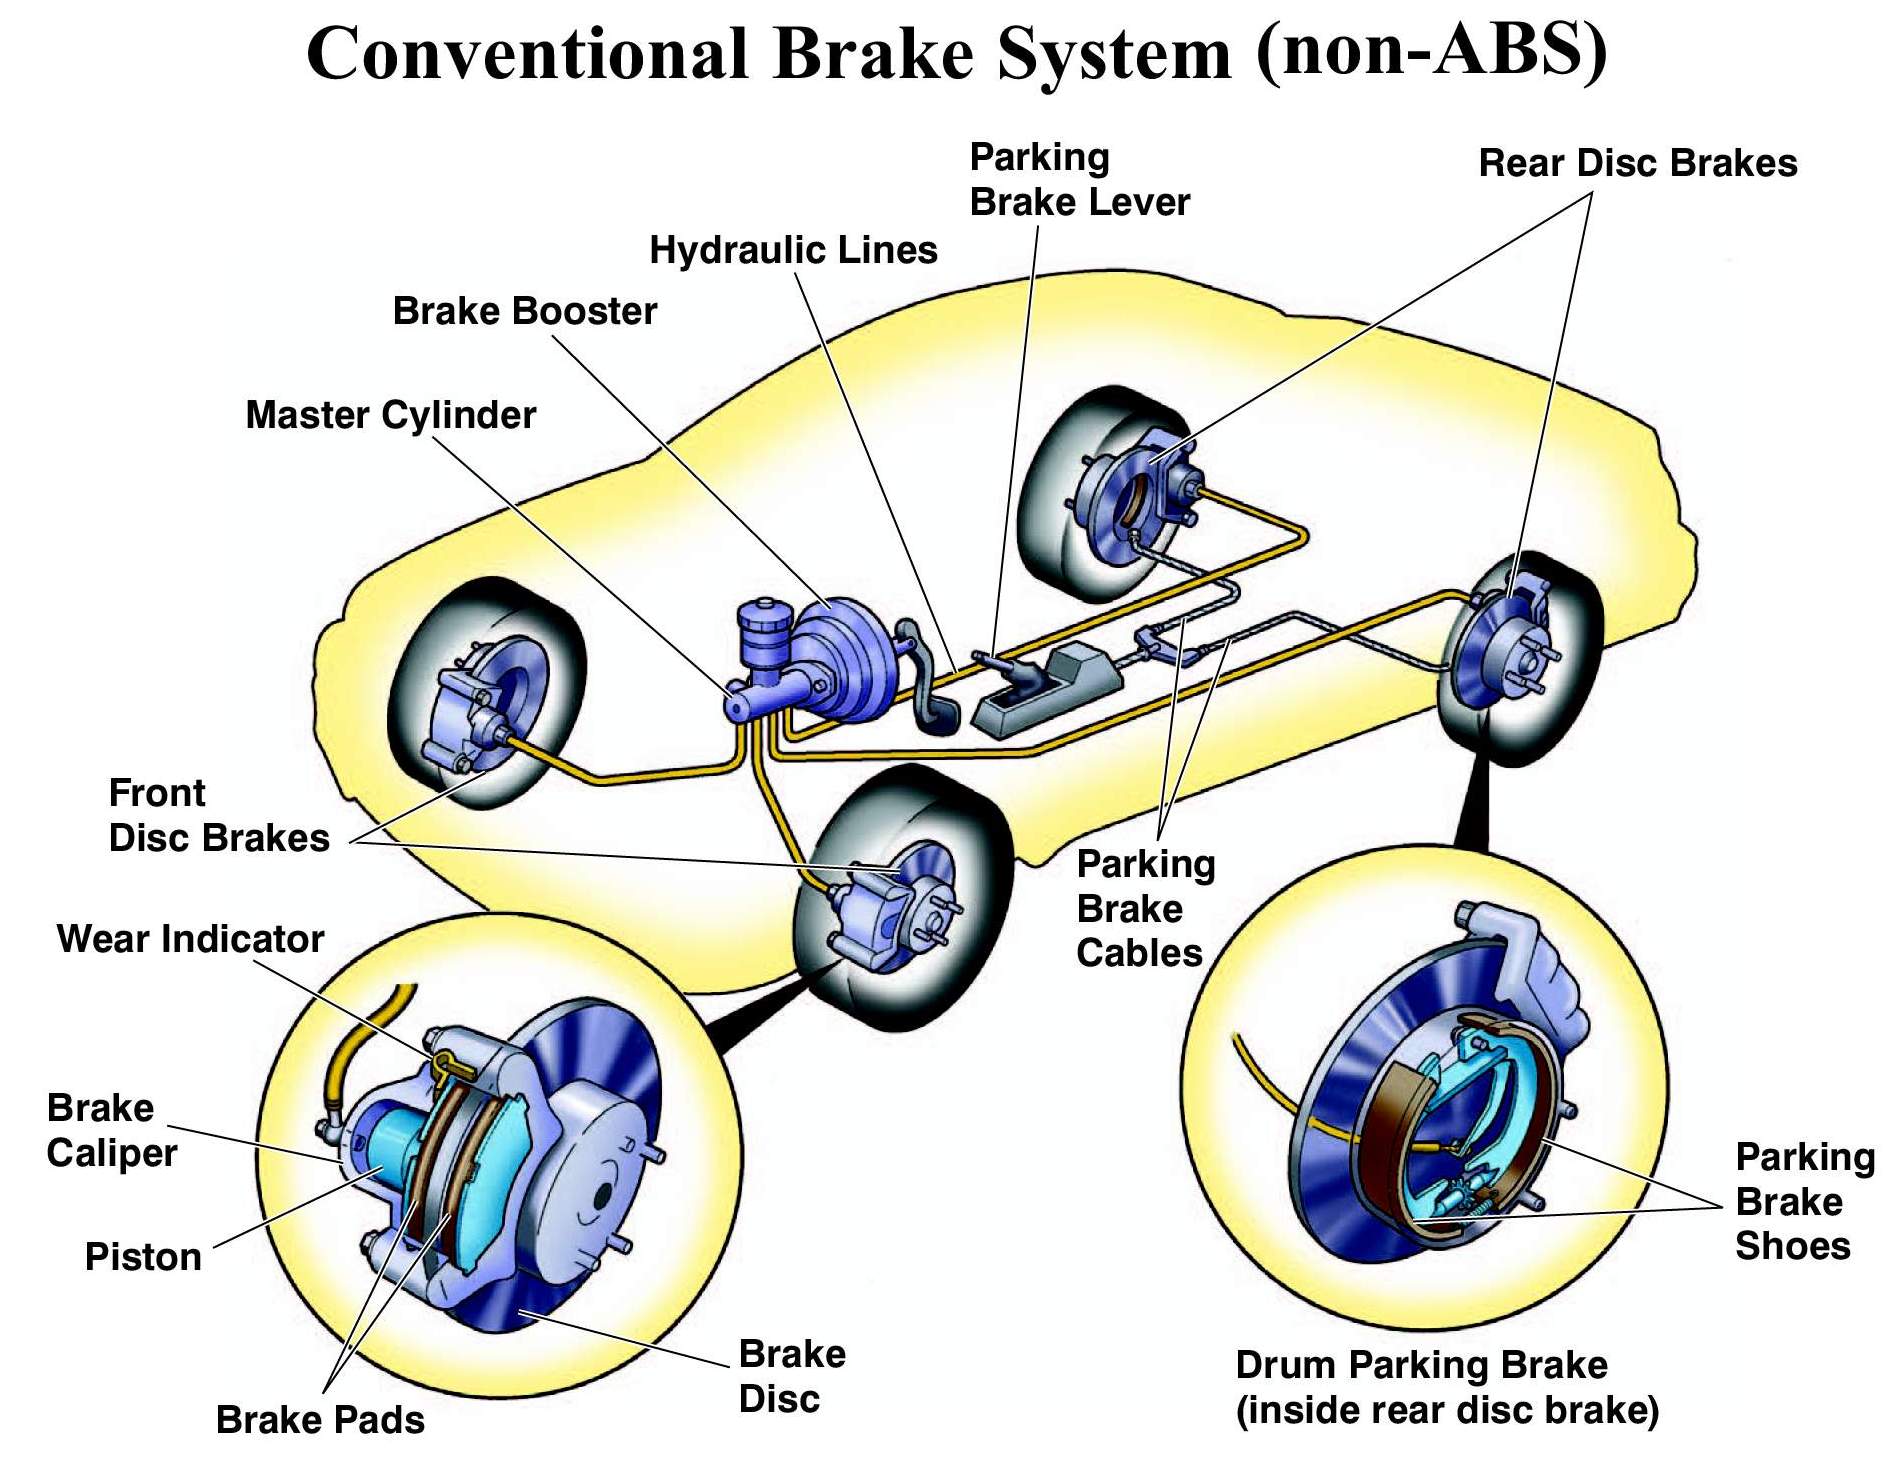 Brake system | Pearltrees